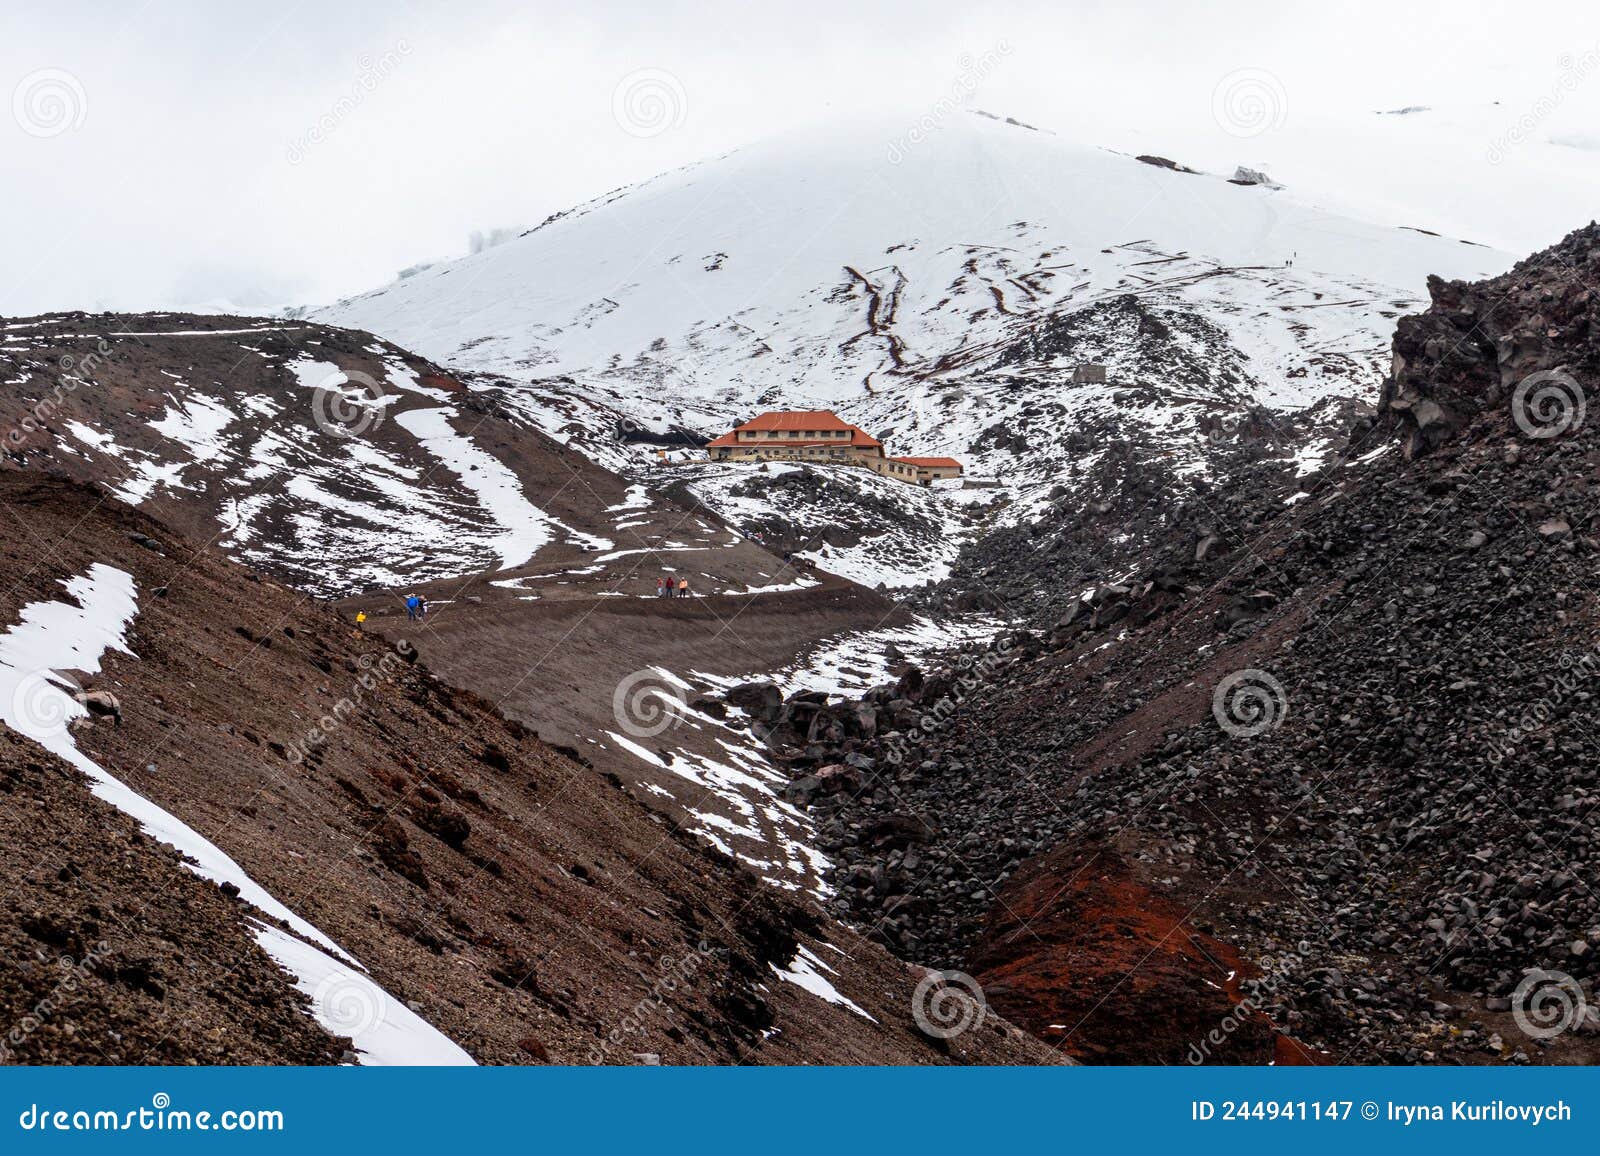 the snowy slope of cotopaxi volcano